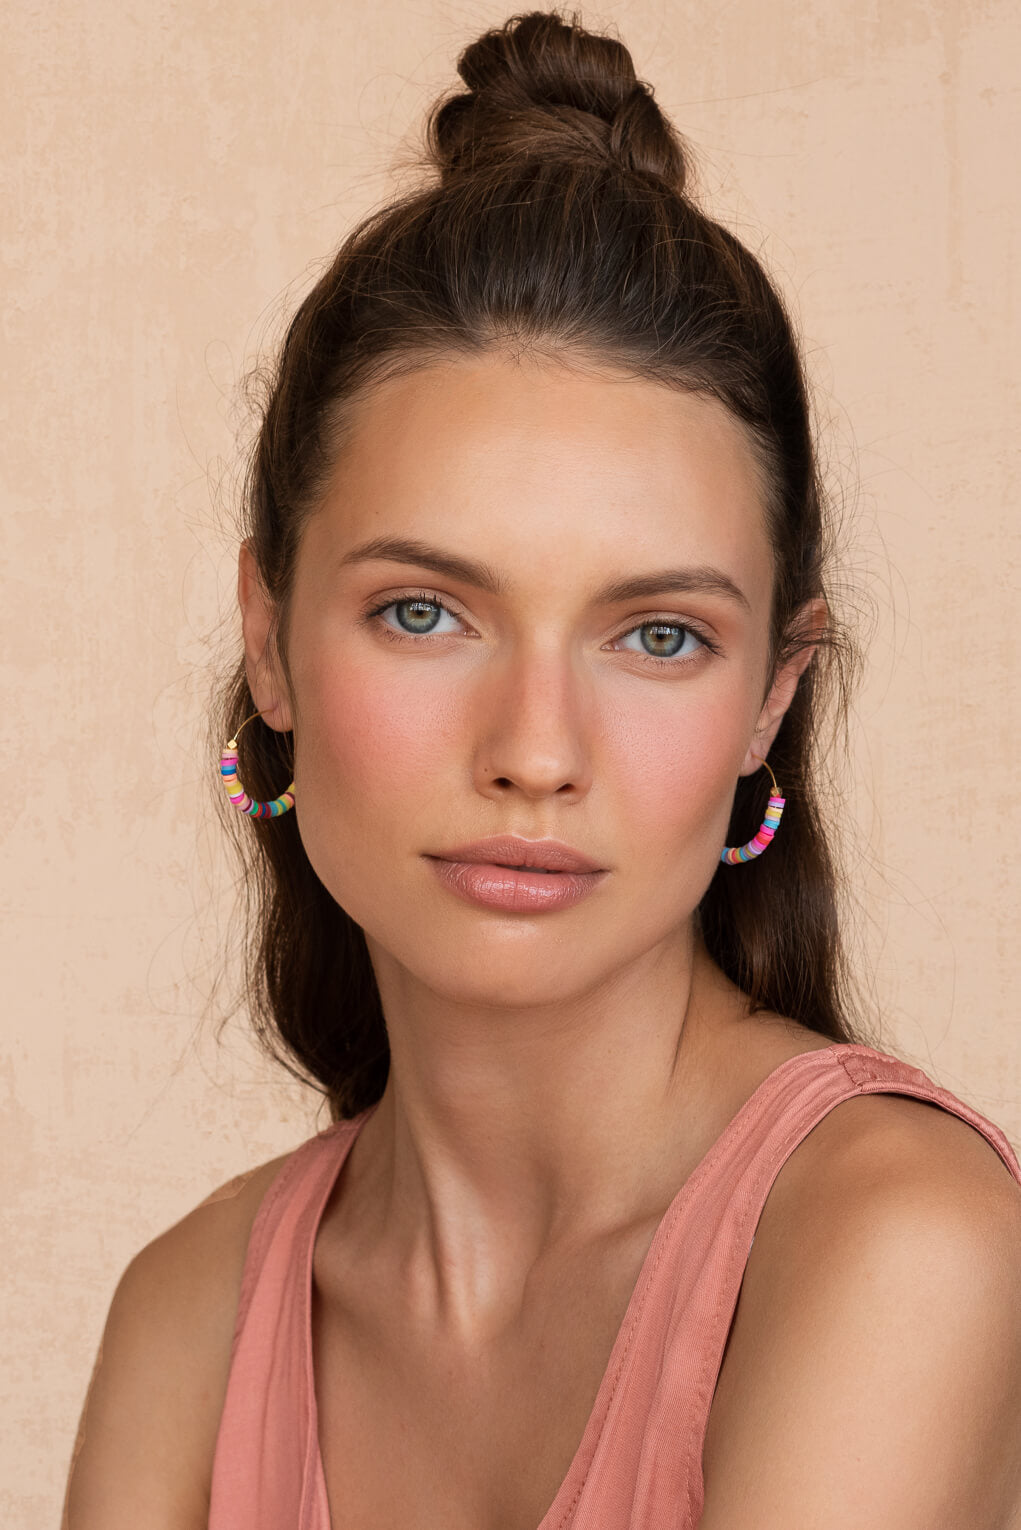 - Hoop earrings decorated with colorful silicone beads, 30 mm in